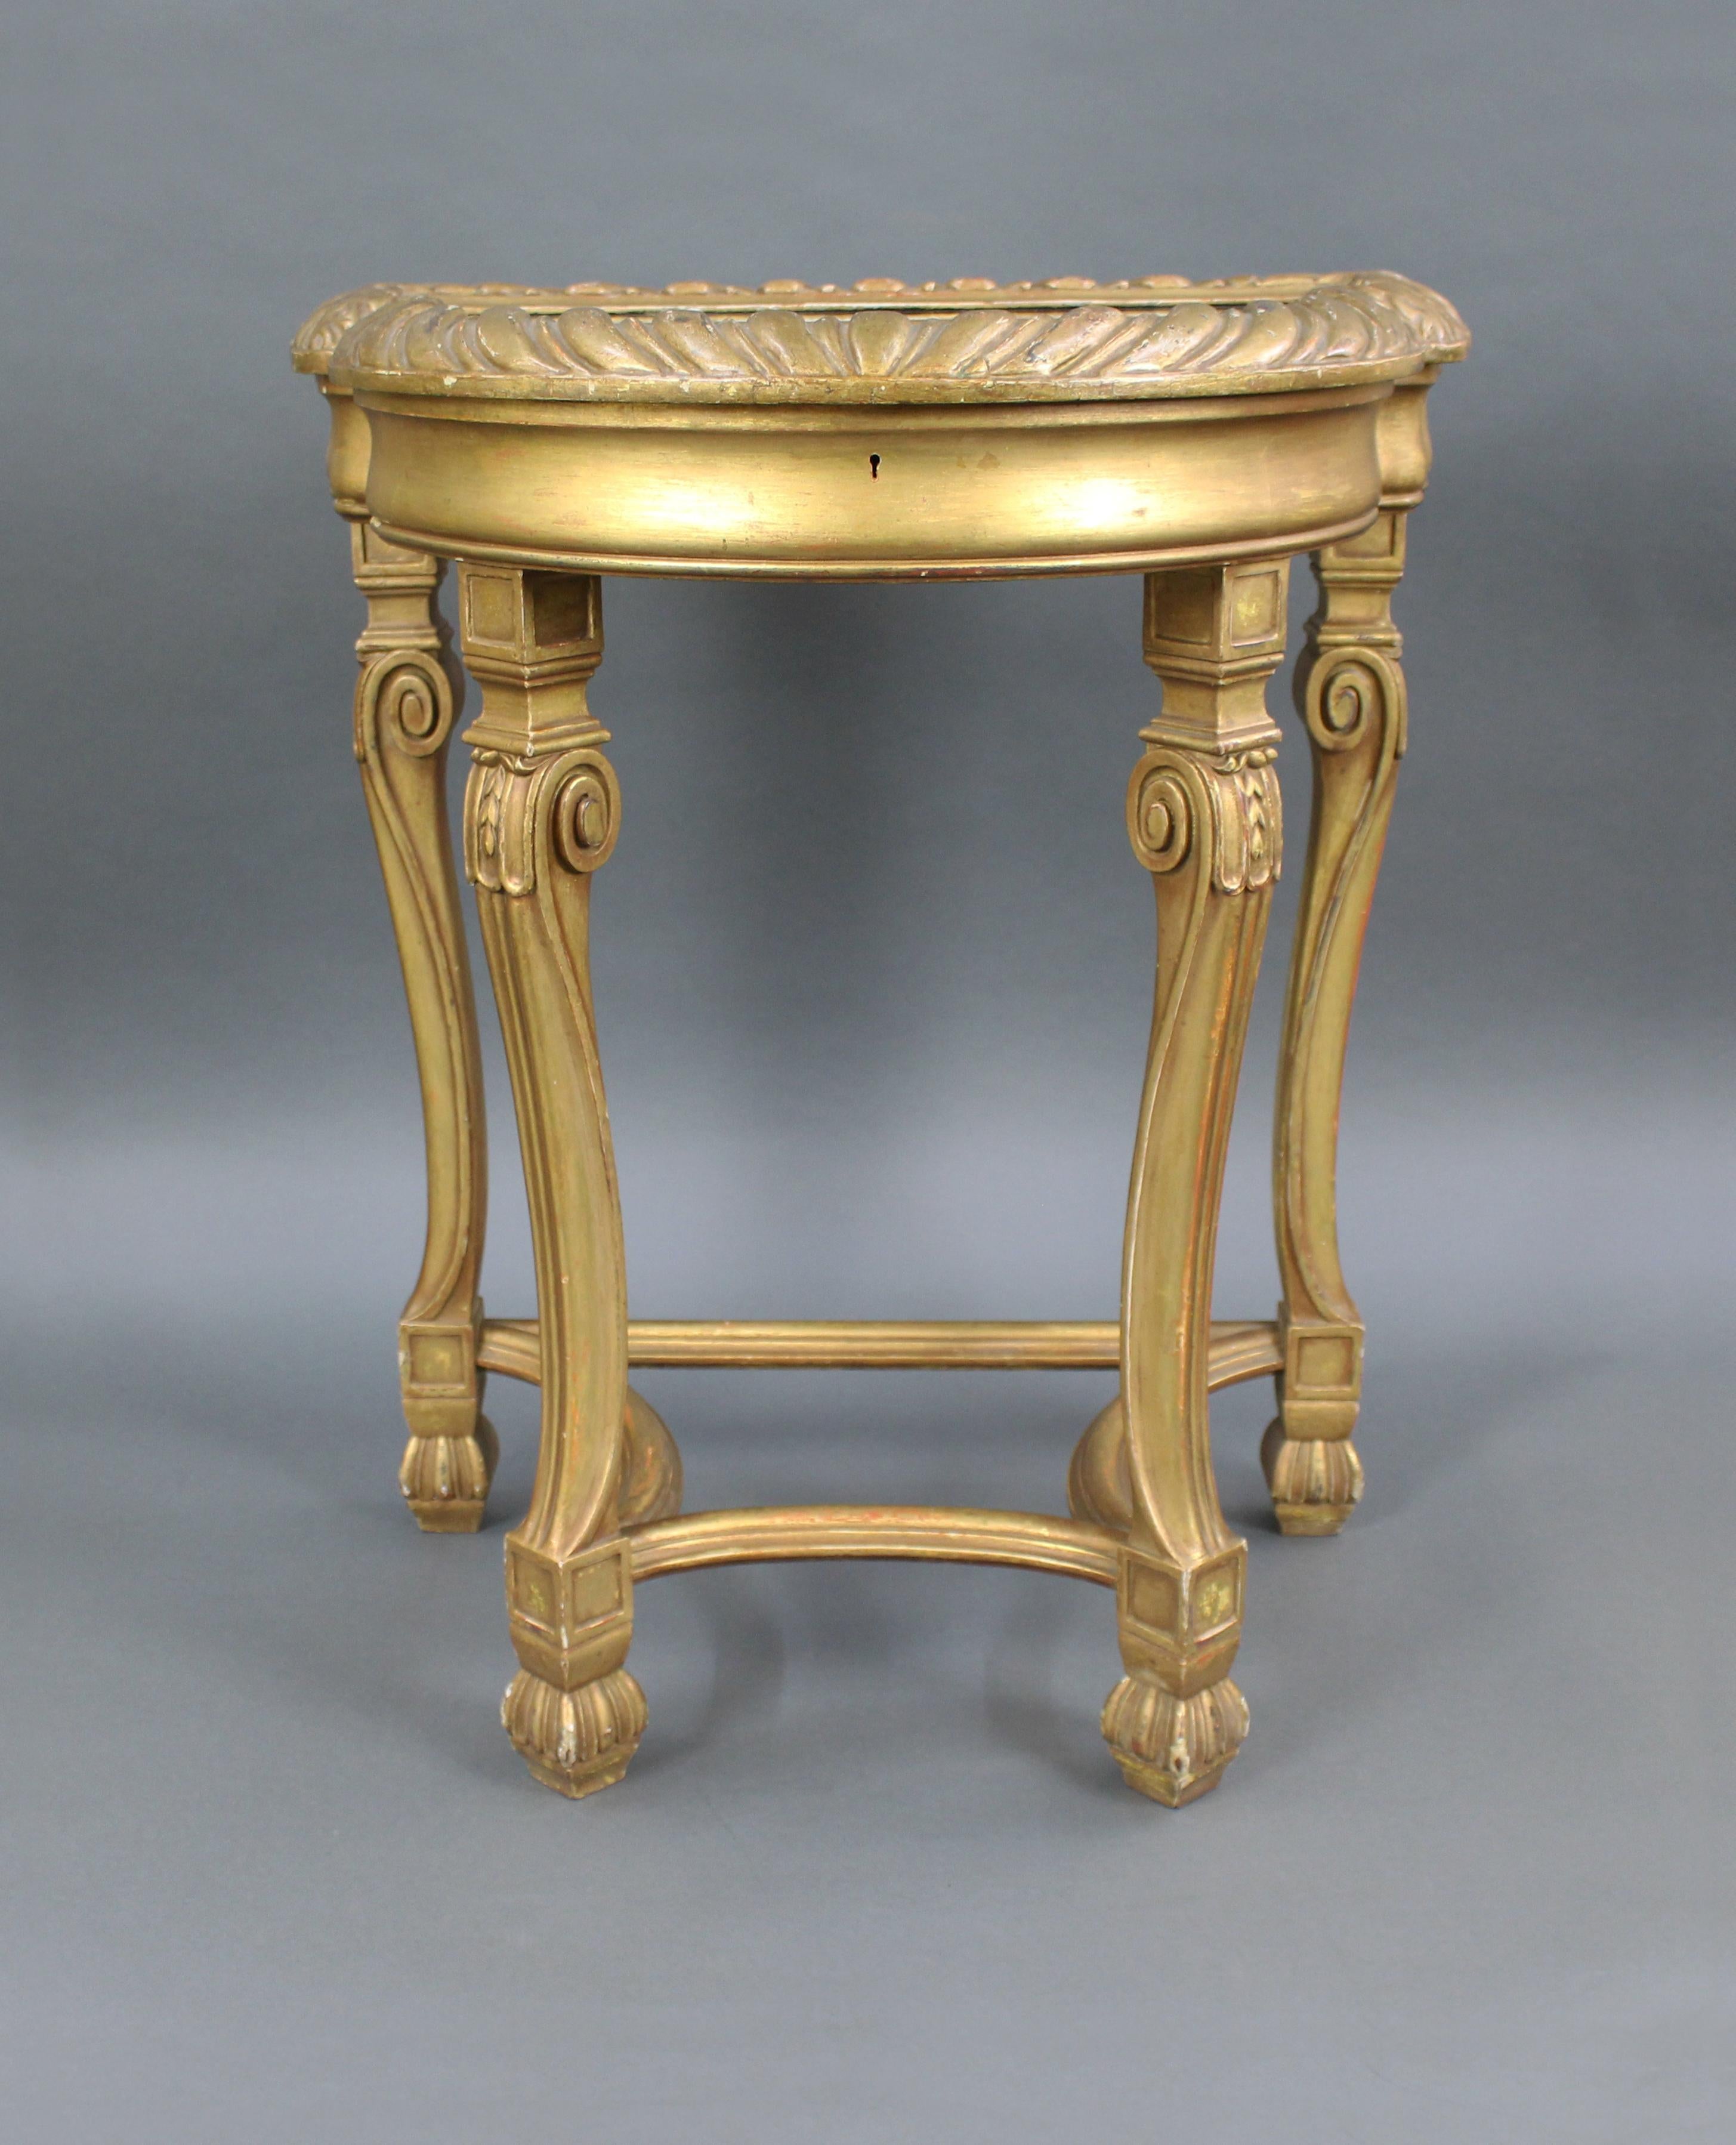 Measures: Width 61 cm 24 in
Depth 46 cm 18 in
Height 72.5 cm 28 1/2 in.
 

 

Period: 19th century
Wood: Carved wood
Finish: Gilt
Condition: Good condition. Sound structure. A little wear to gilt finish as pictured
 

 

Offered for